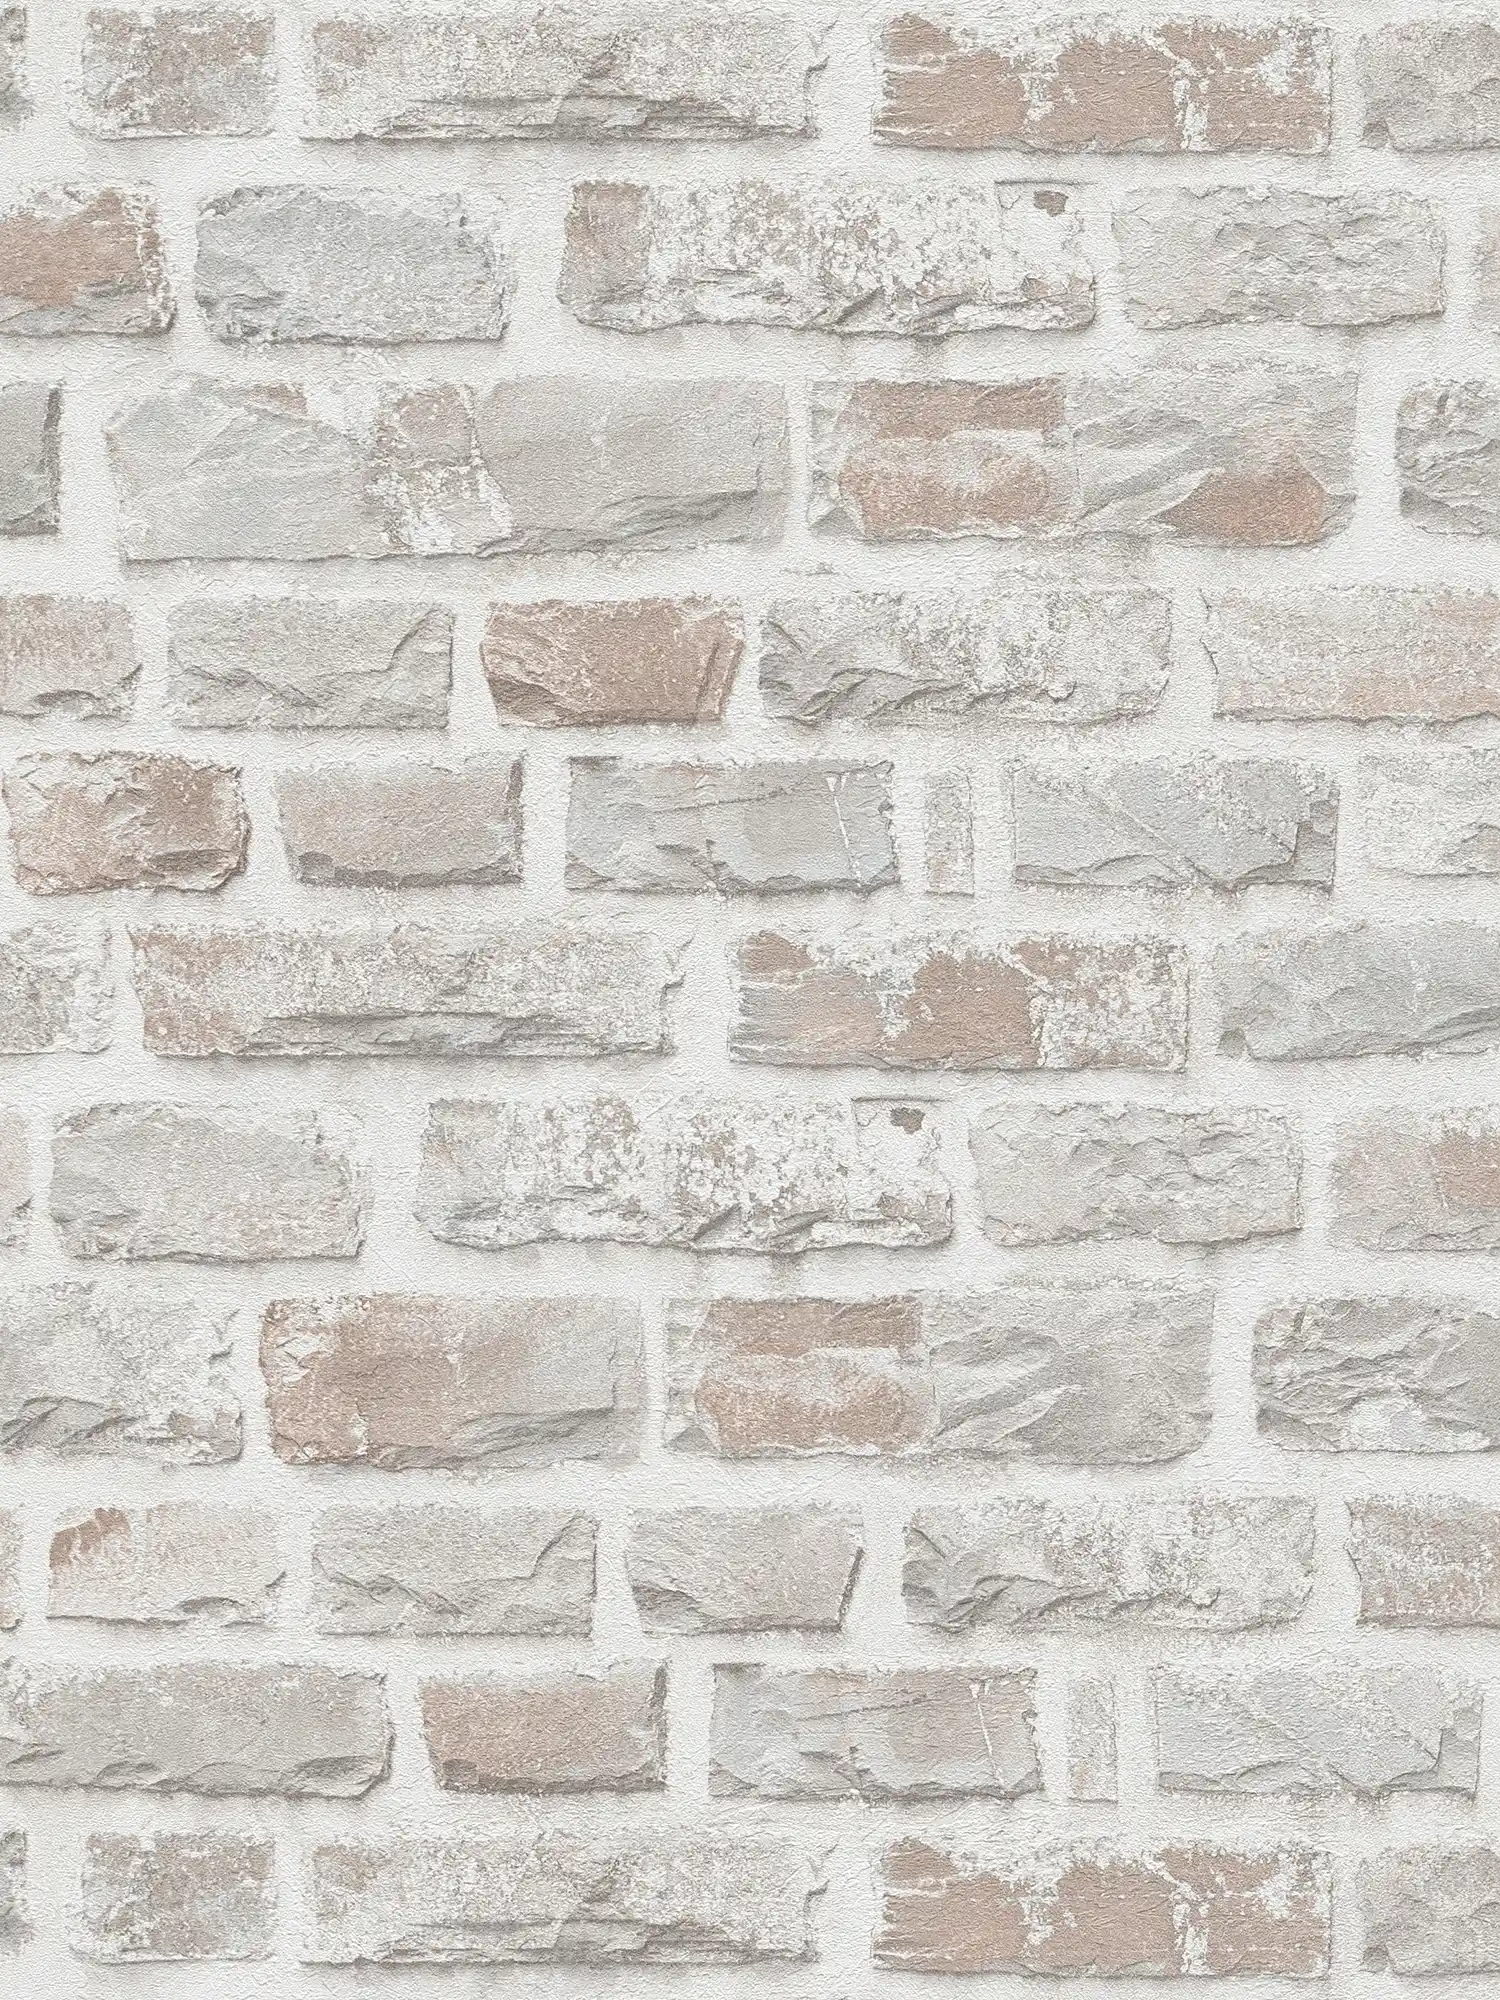         Non-woven wallpaper with natural stone wall PVC-free - grey, white
    